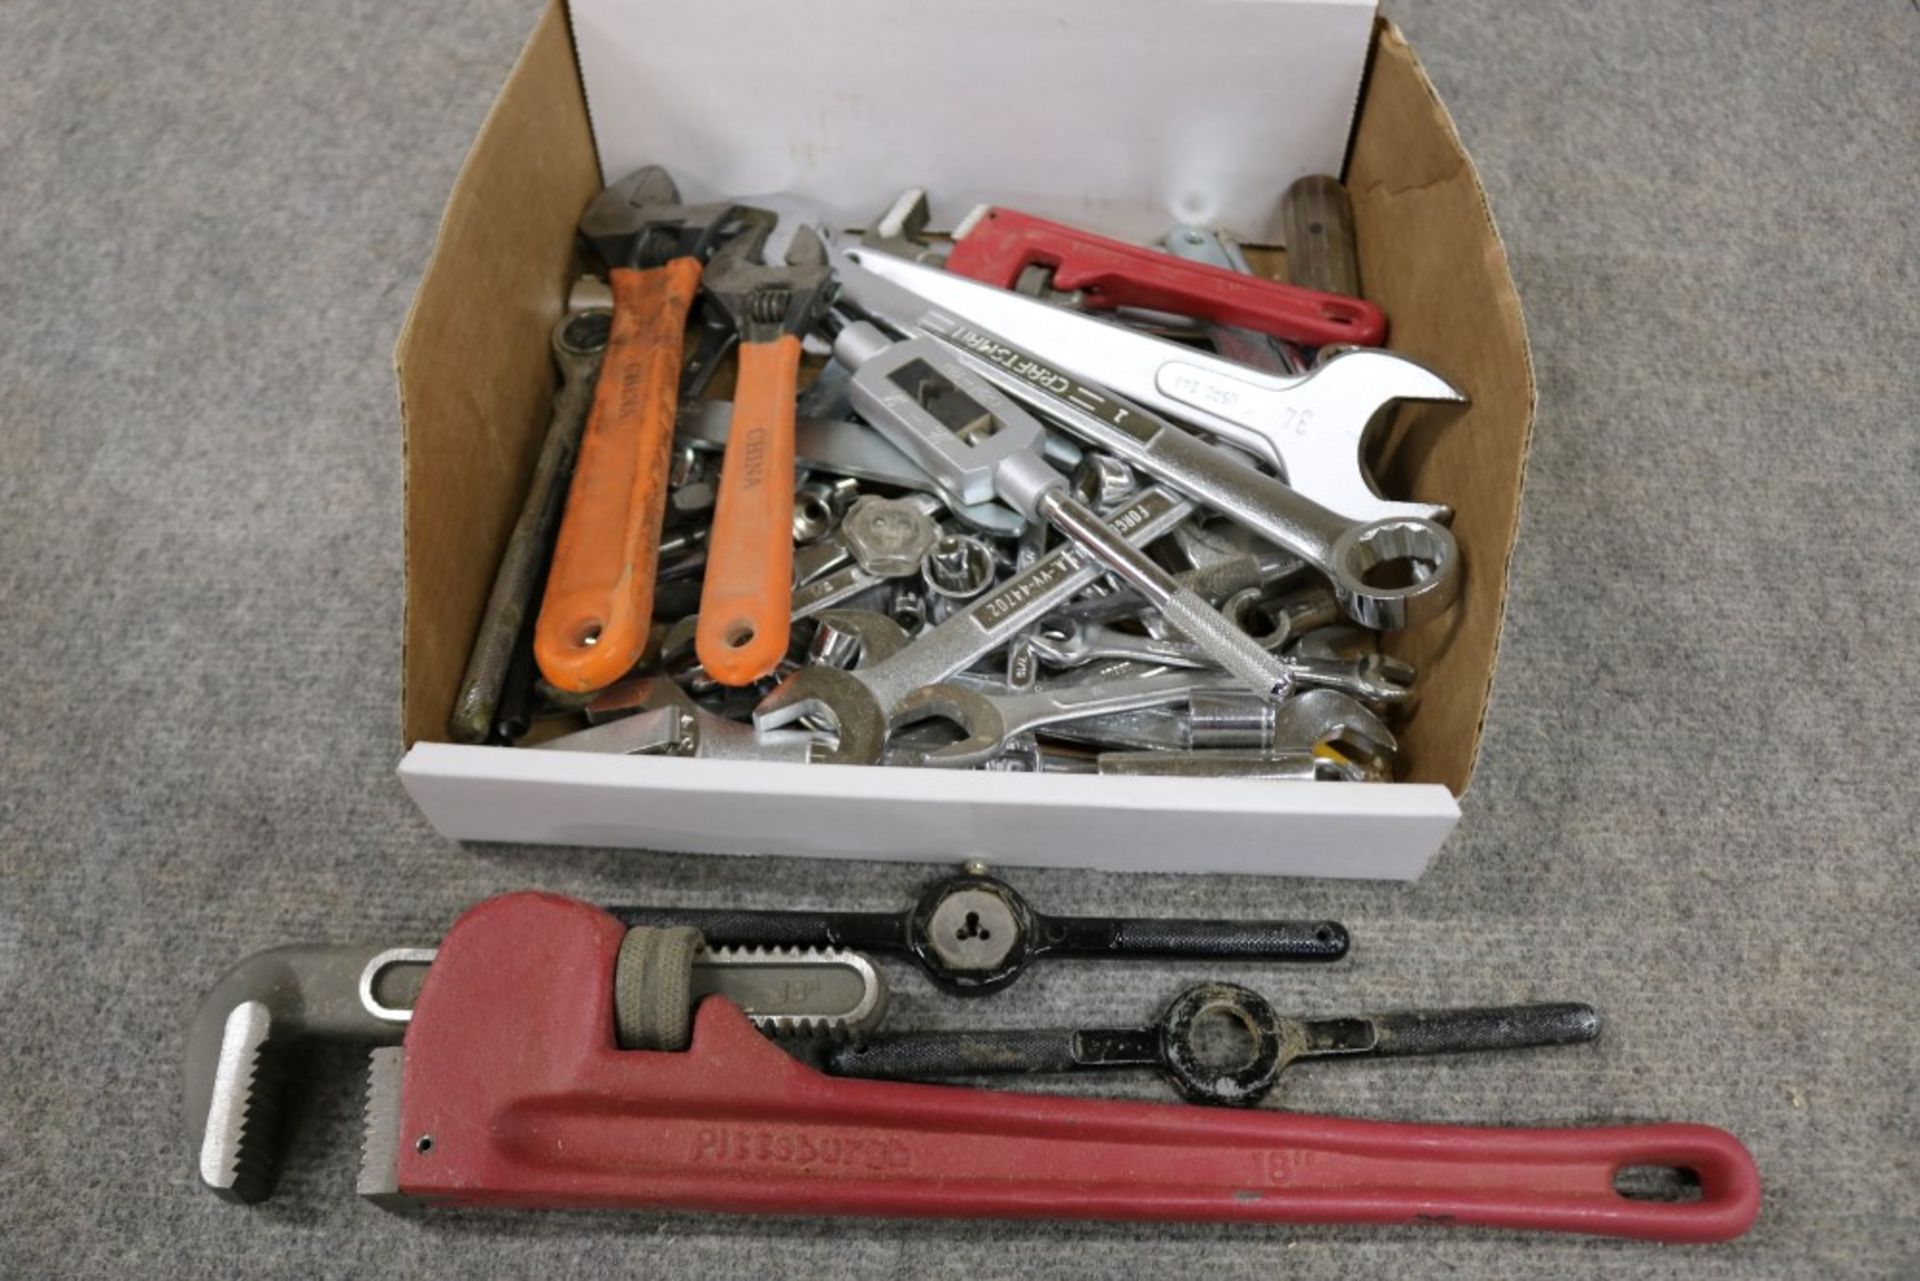 Box of Wrenches, Sockets, Pttsburg 18" Pipe Wrench and Pipe Threading Tool with Attachements - Image 3 of 5